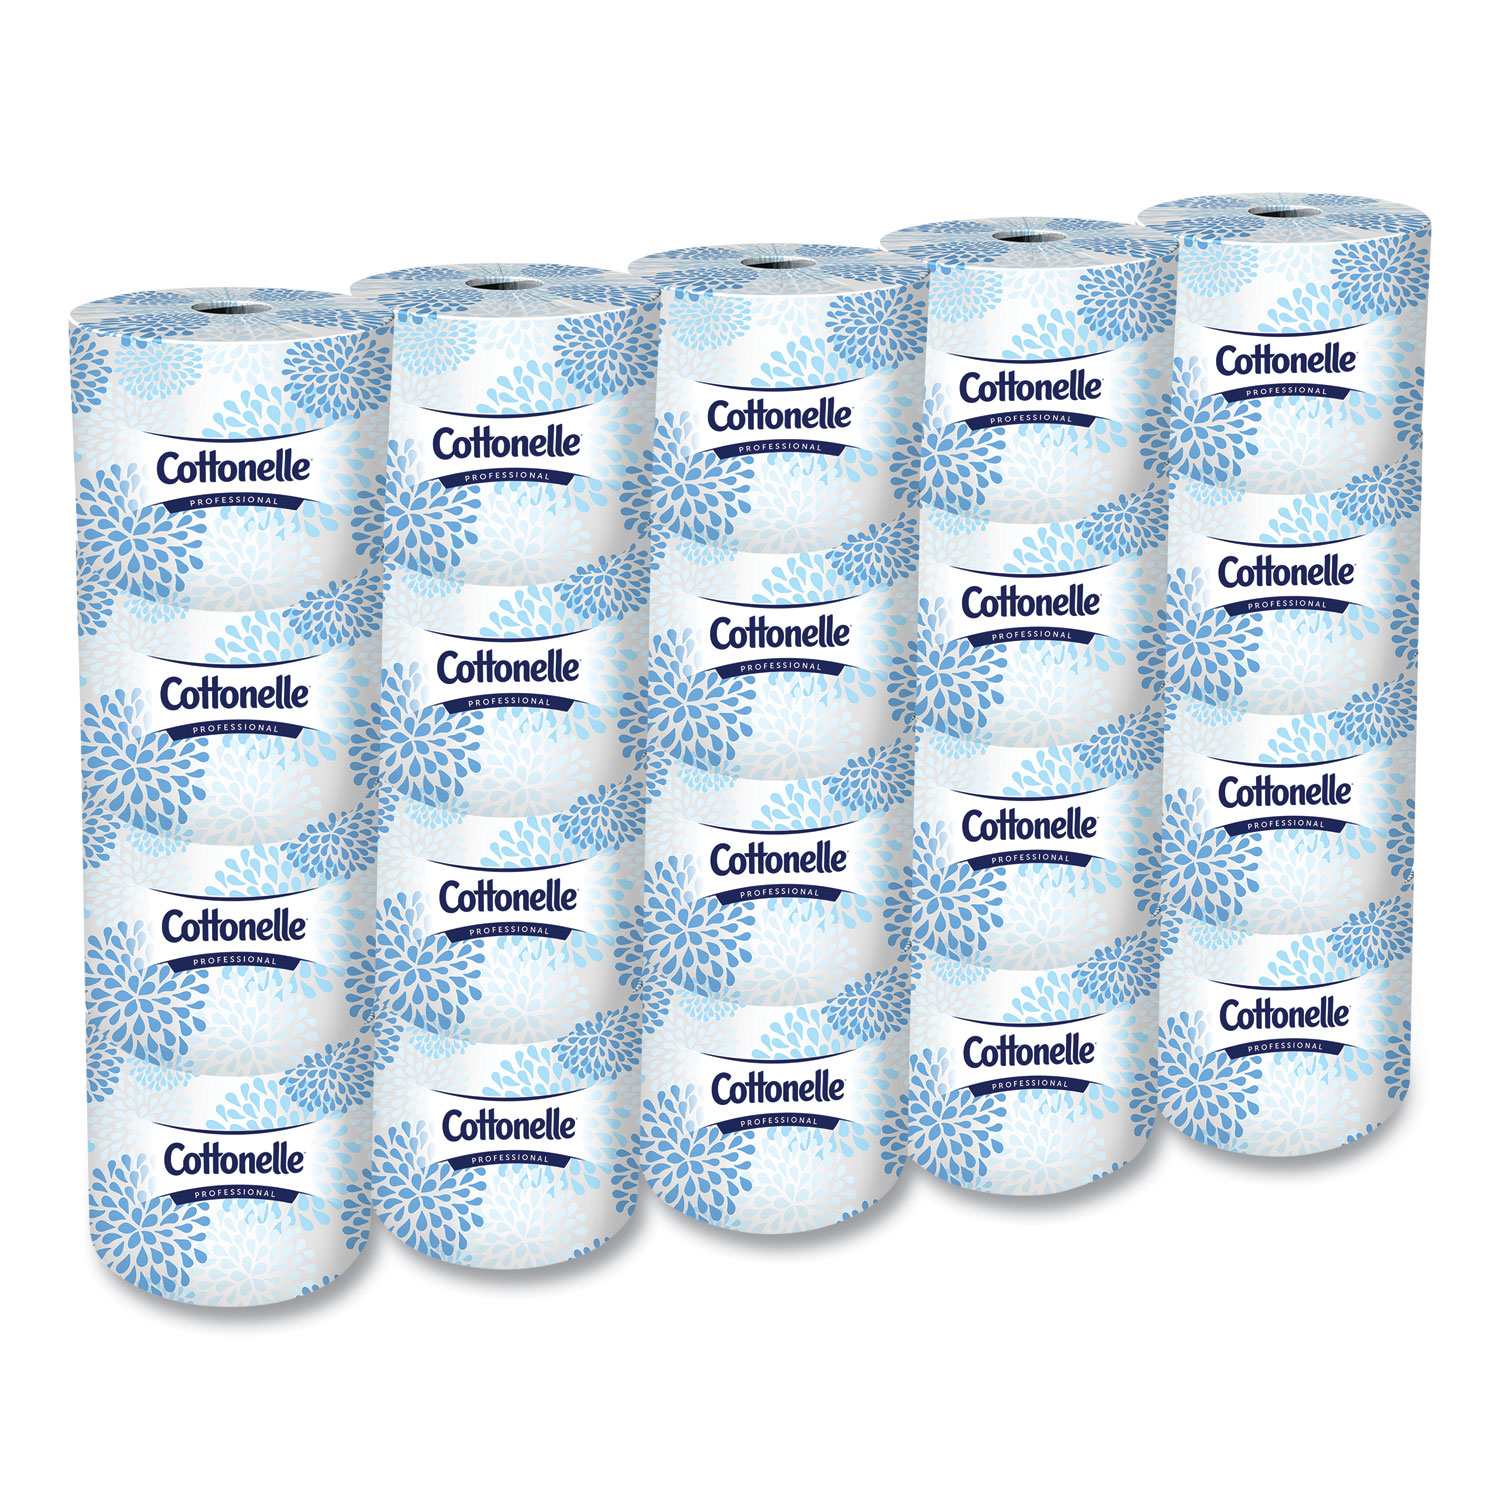 2-Ply Bathroom Tissue, Septic Safe, White, 451 Sheets/Roll, 20 Rolls/Carton